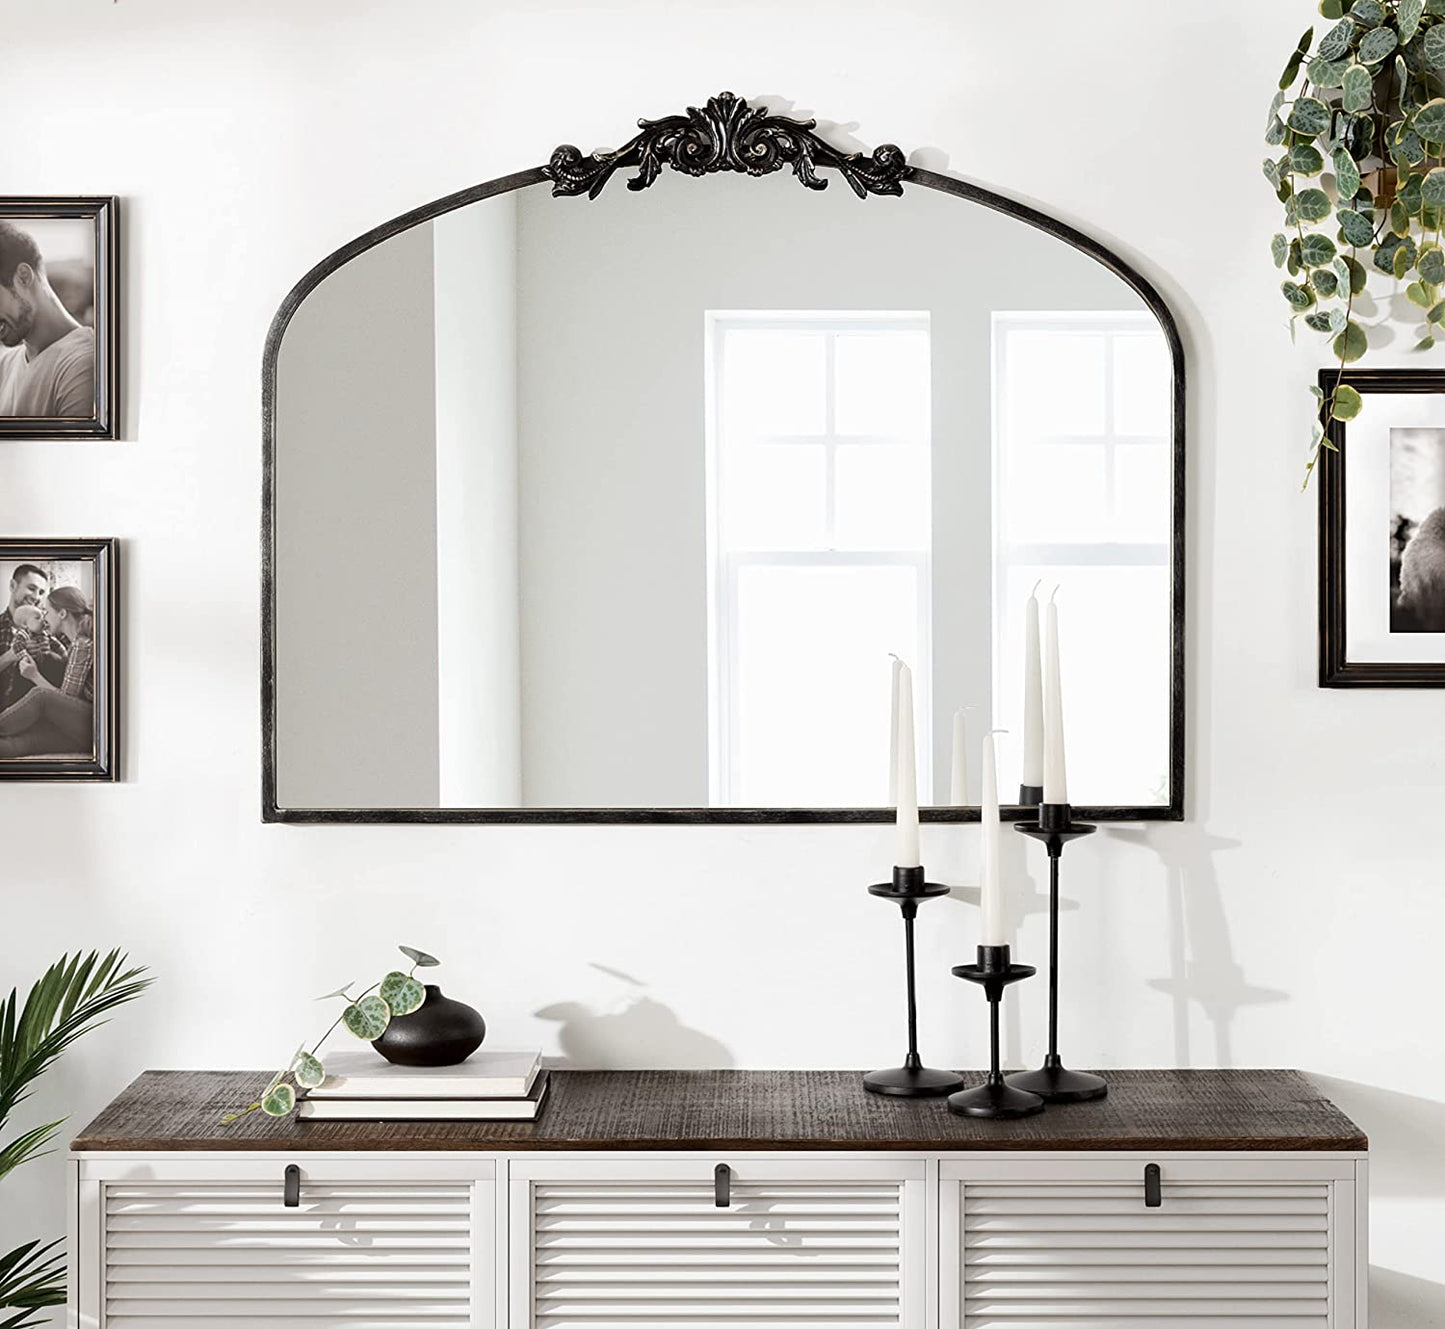 Kate and Laurel Arendahl Traditional Arch Mirror